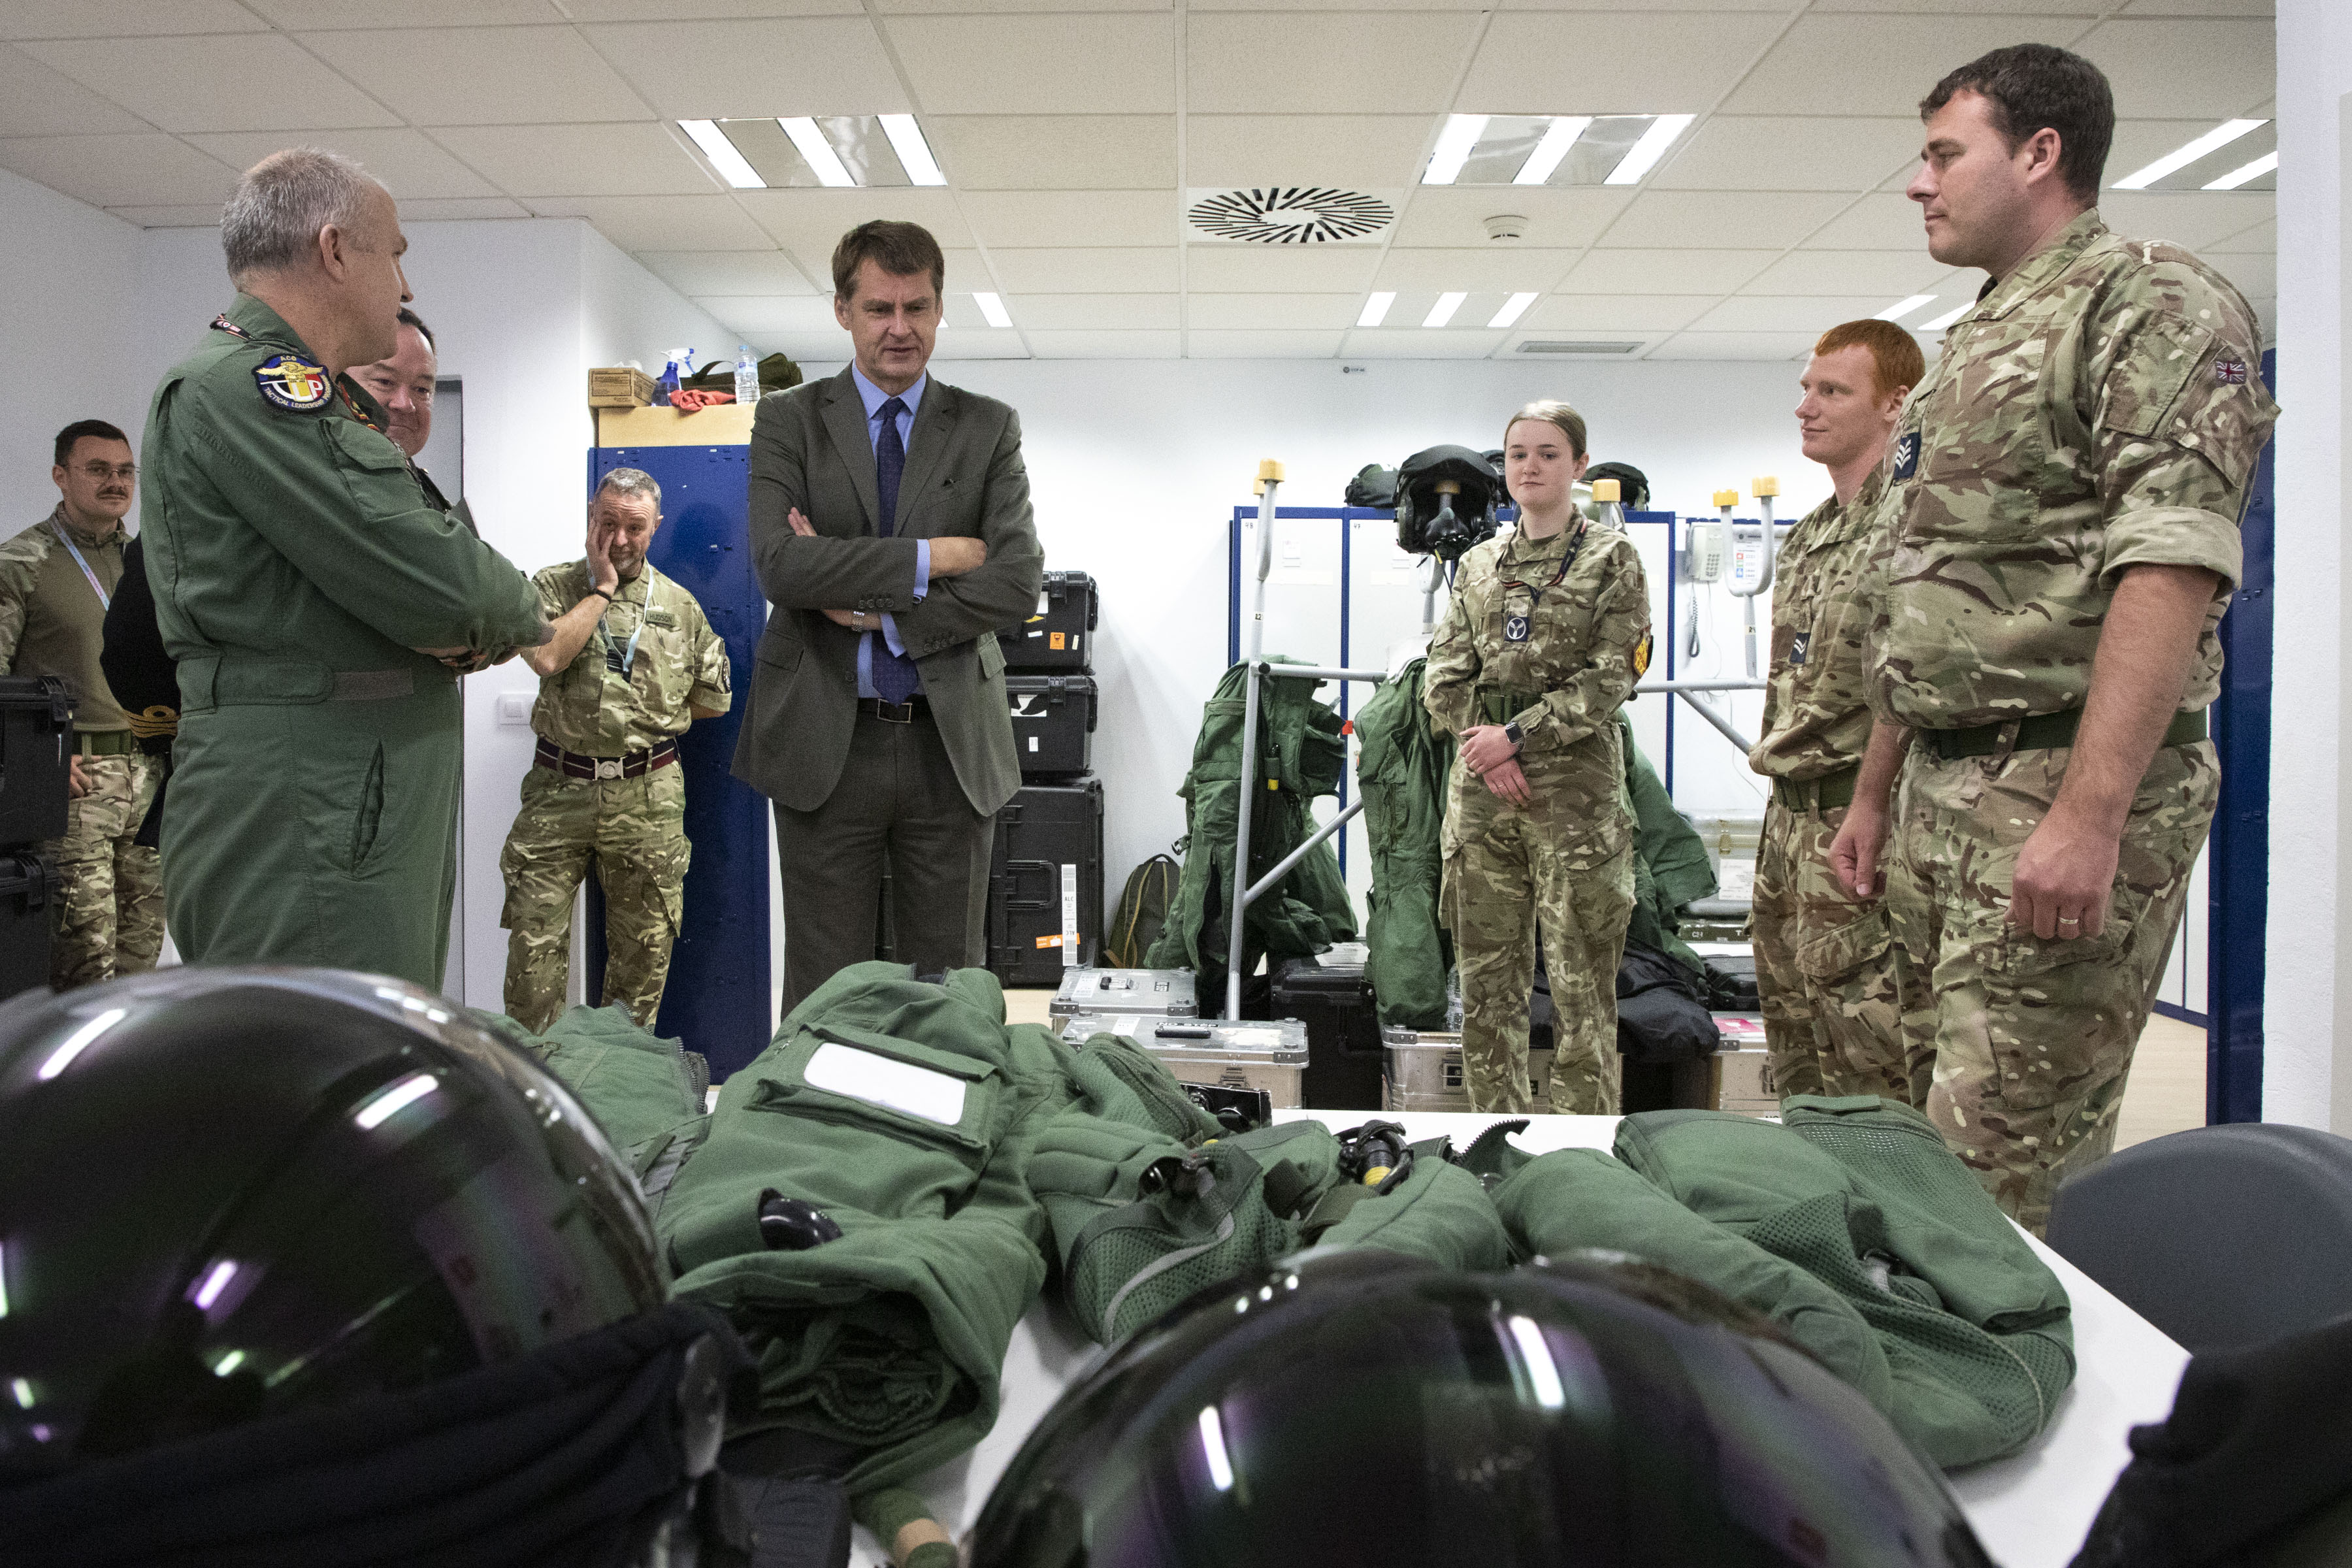 military personnel discussing equipment